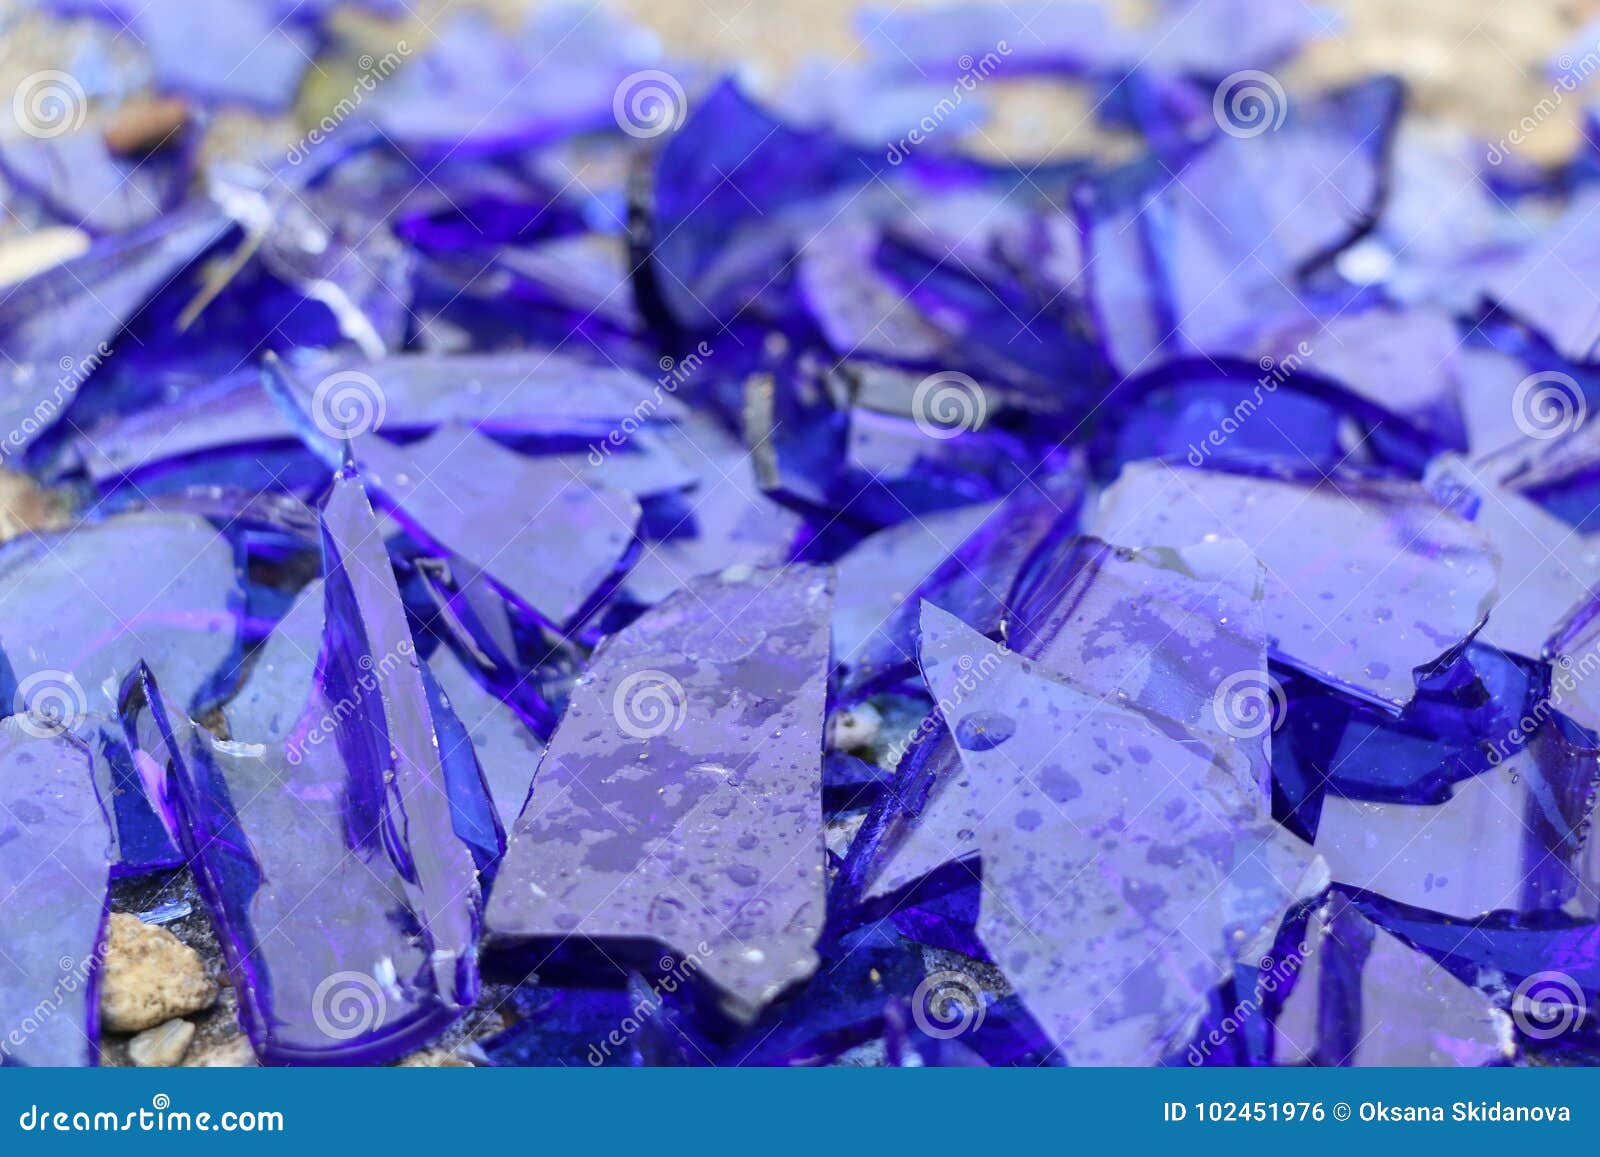 Blue Broken Glass On A Concrete Surface Texture For A Background